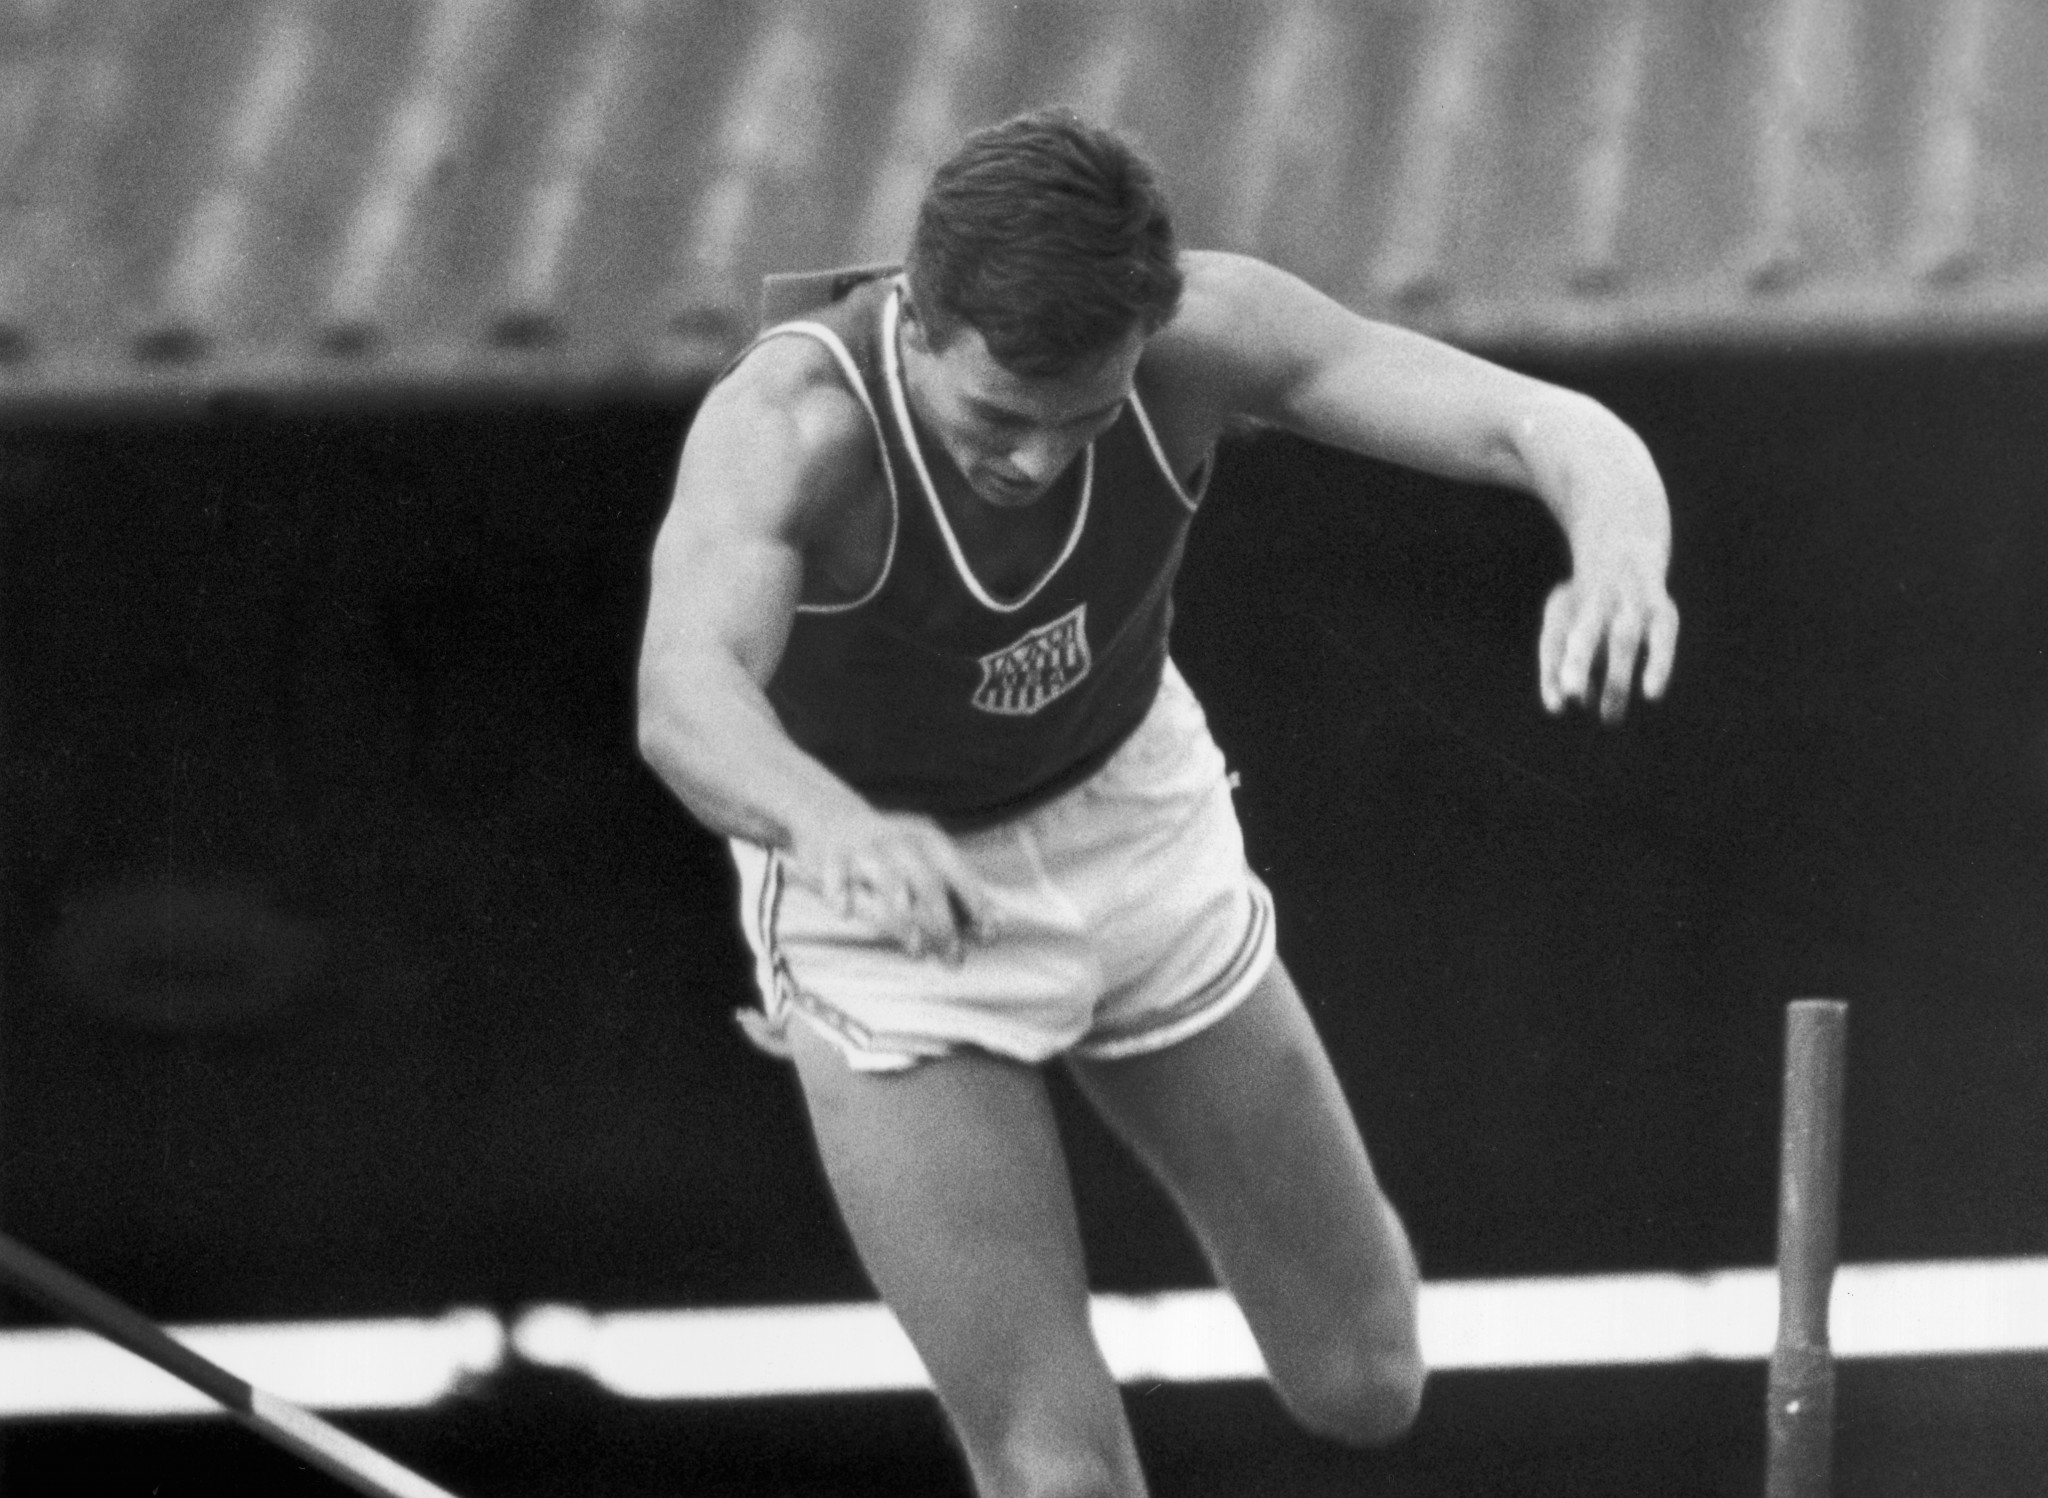 Bob Seagren gained more fame for his exploits on Superstars than being an Olympic pole vault champion ©Getty Images